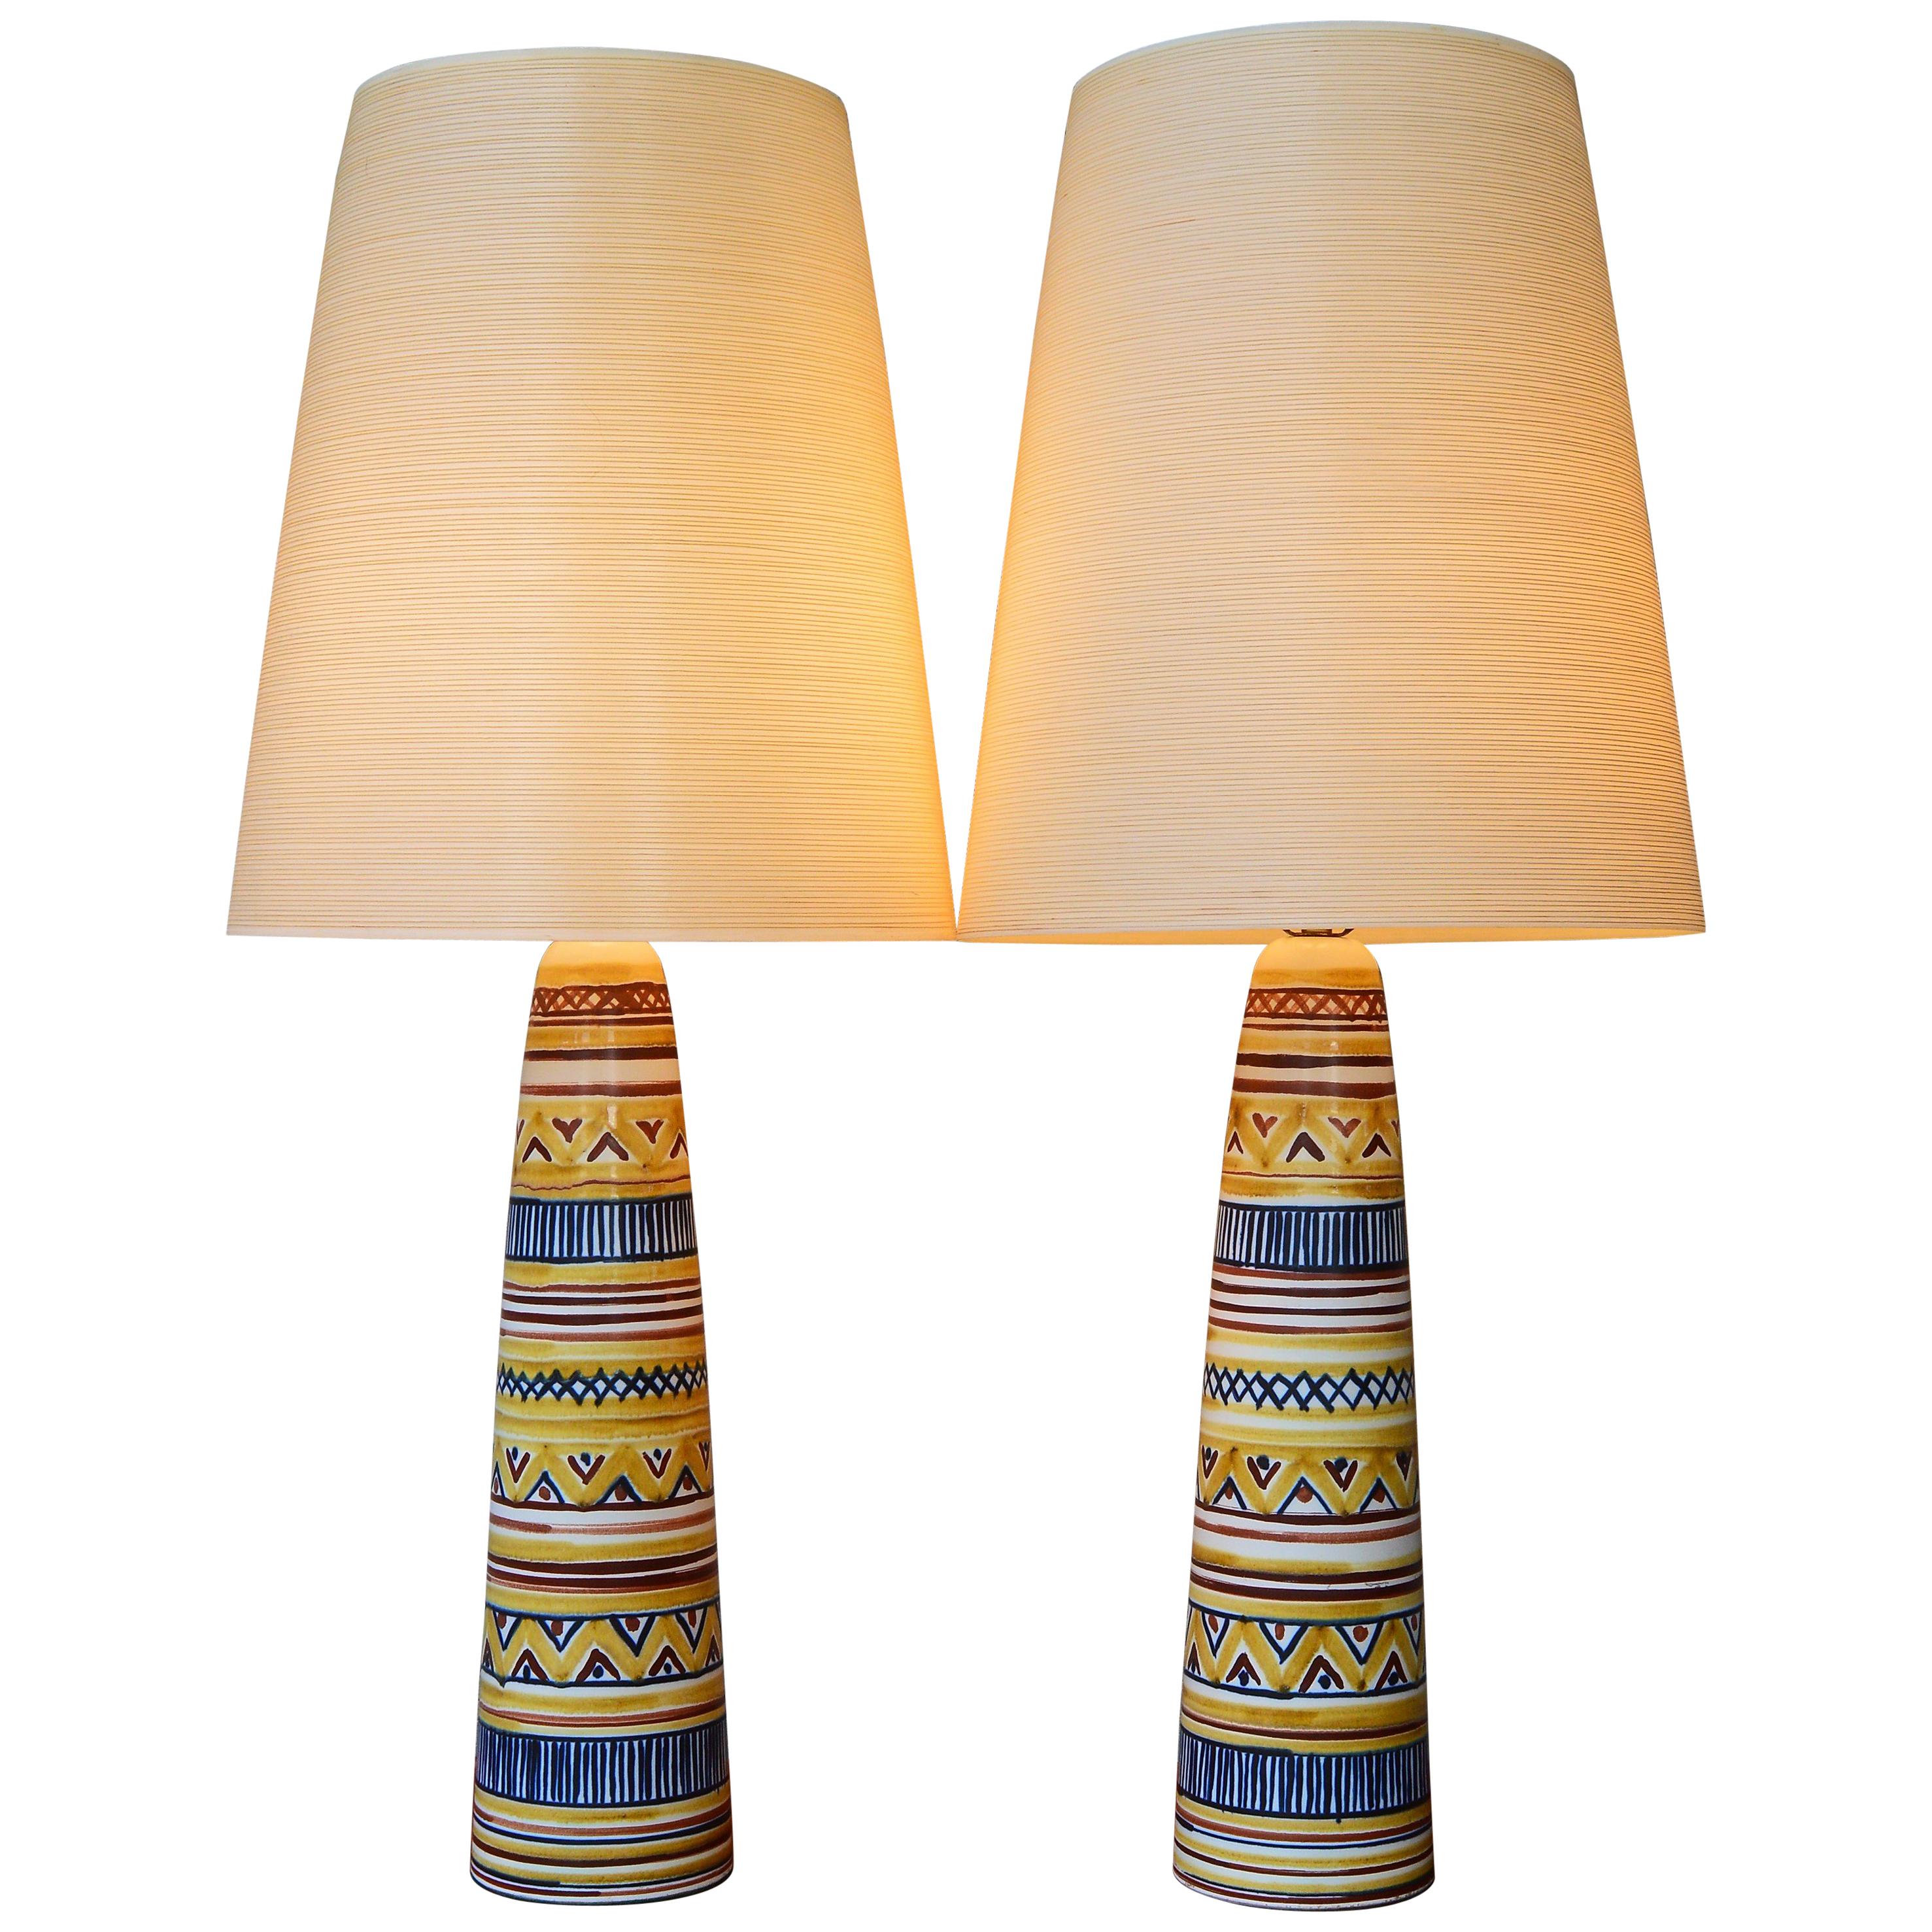 Hand-Painted Pair of Gunnar & Lotte Bostlund Ceramic Lamps with Original Shades